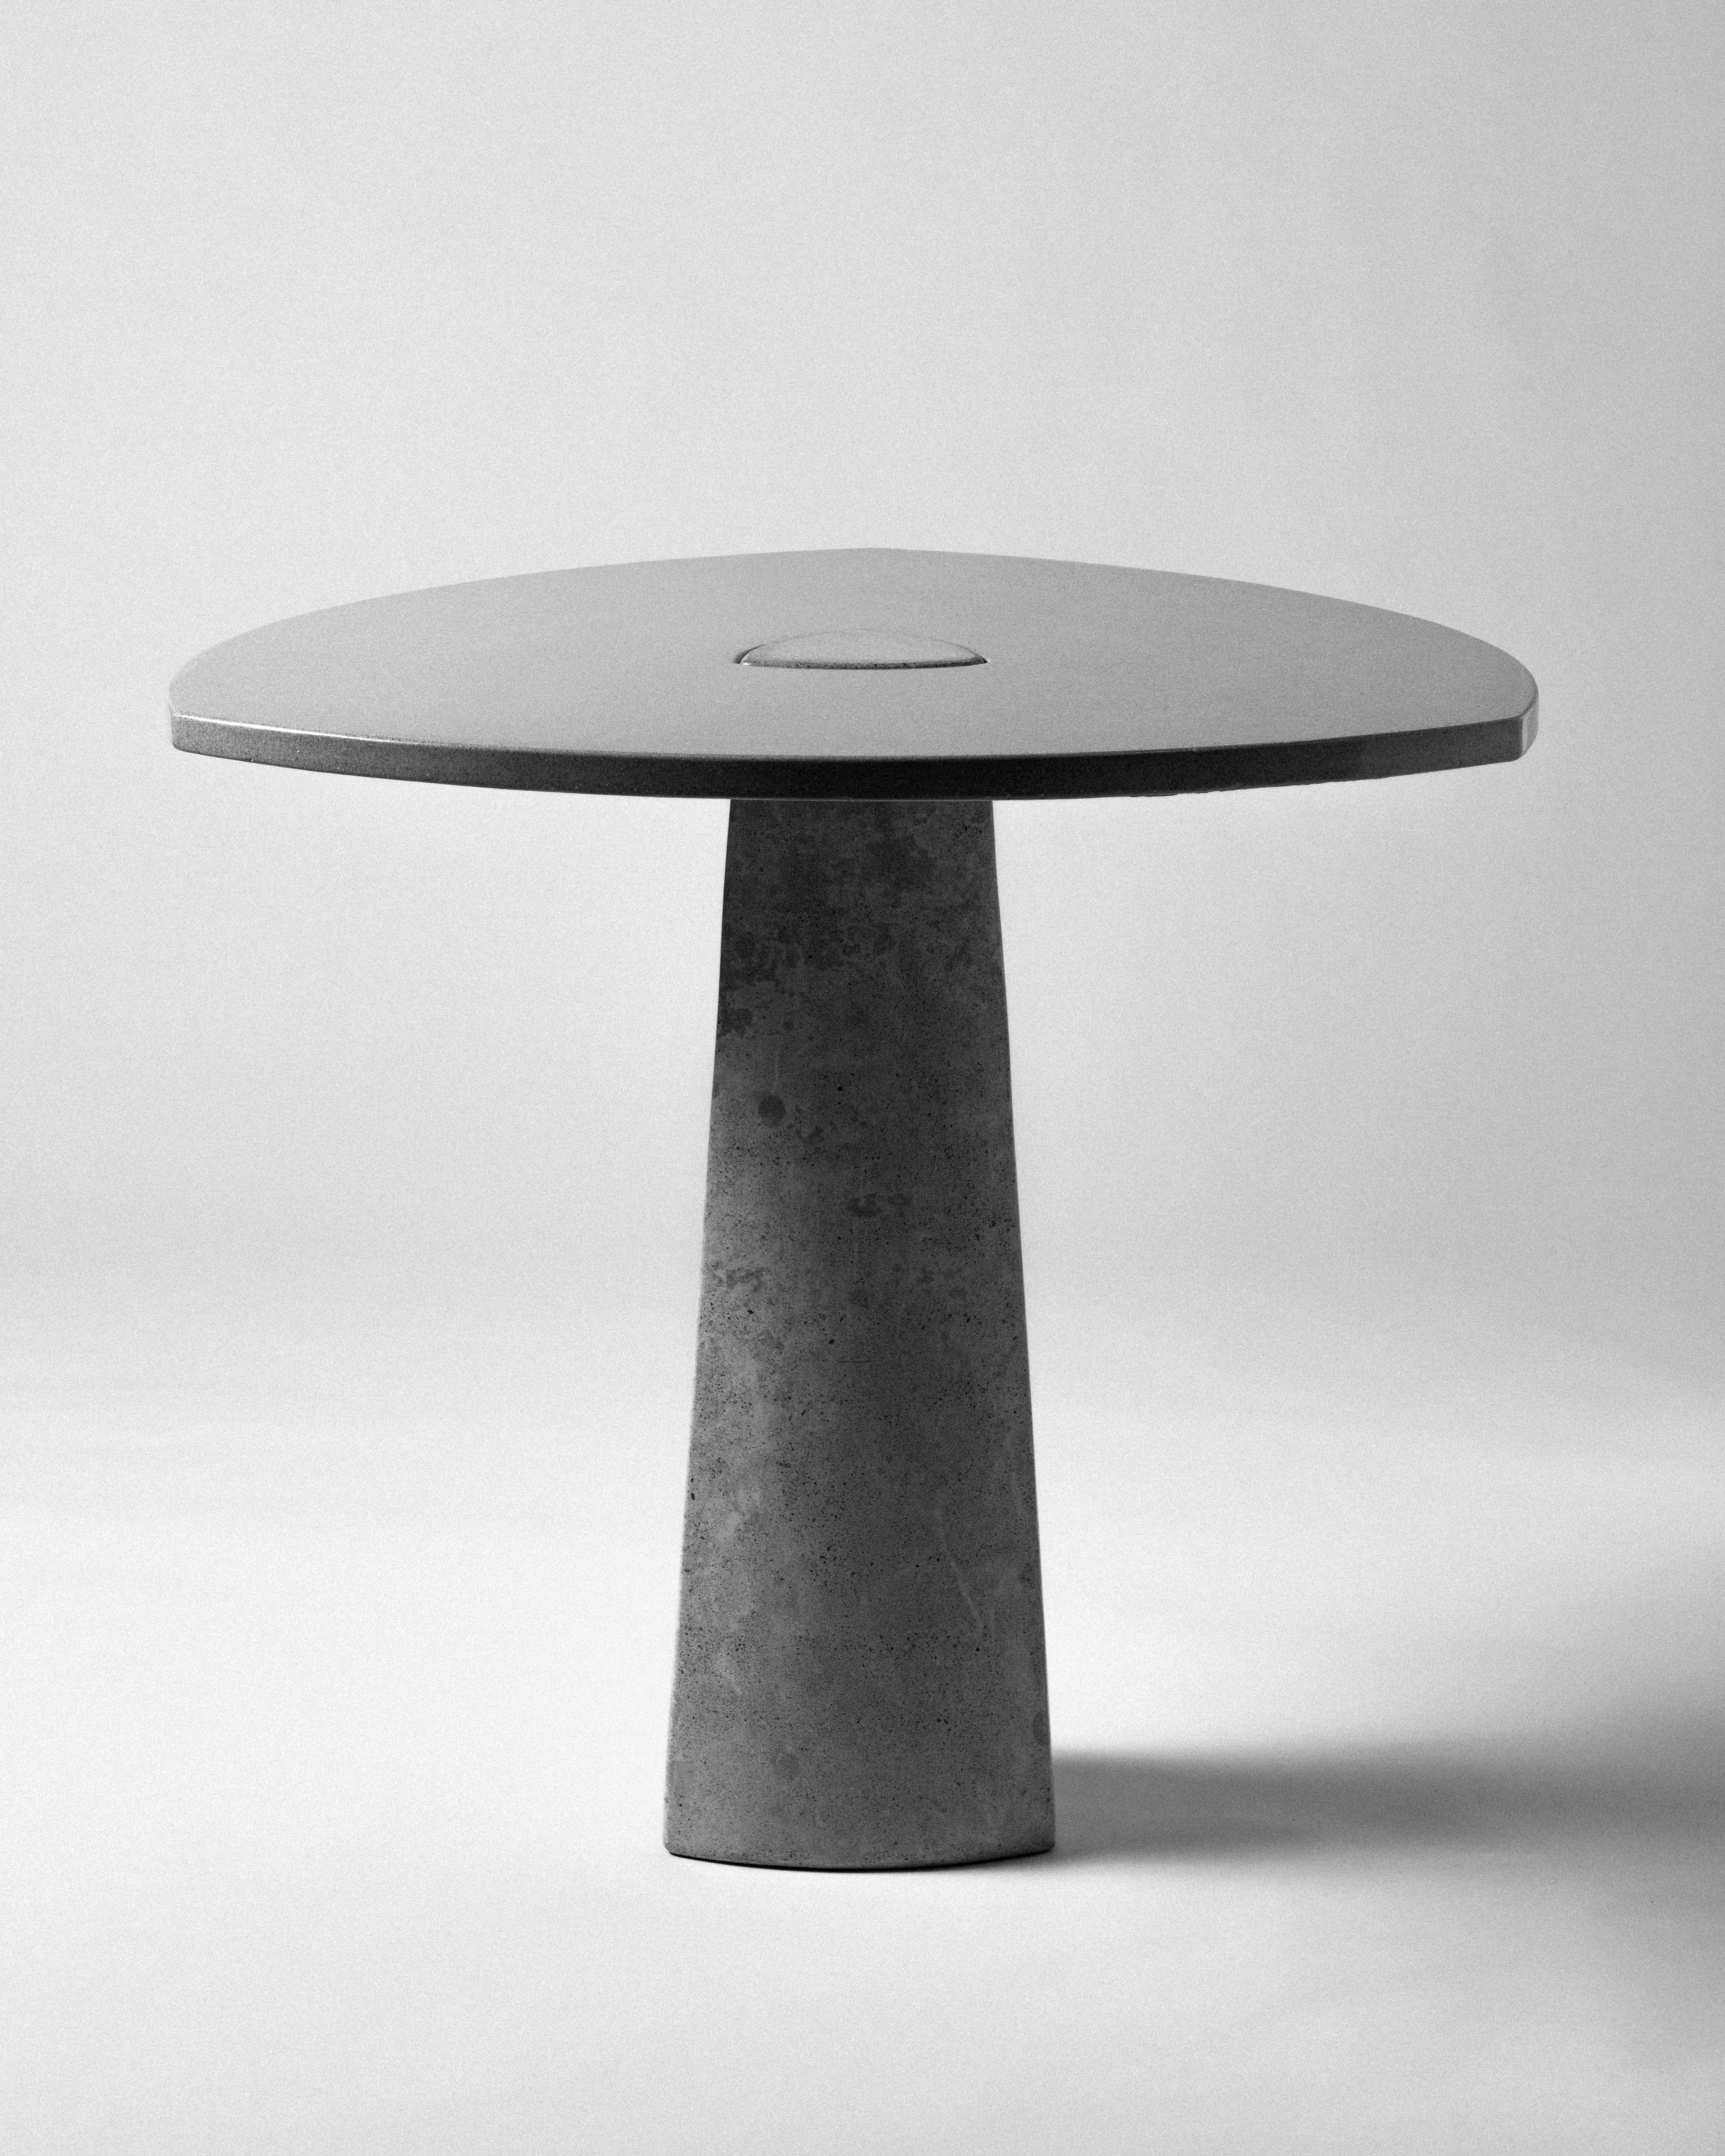 Our favorite breakfast table. The clover table features two pieces of concrete- rounded triangular tabletop and base, locked together by gravity alone. Equal in art and utility, the table serves as a collector's piece and as a functional dining